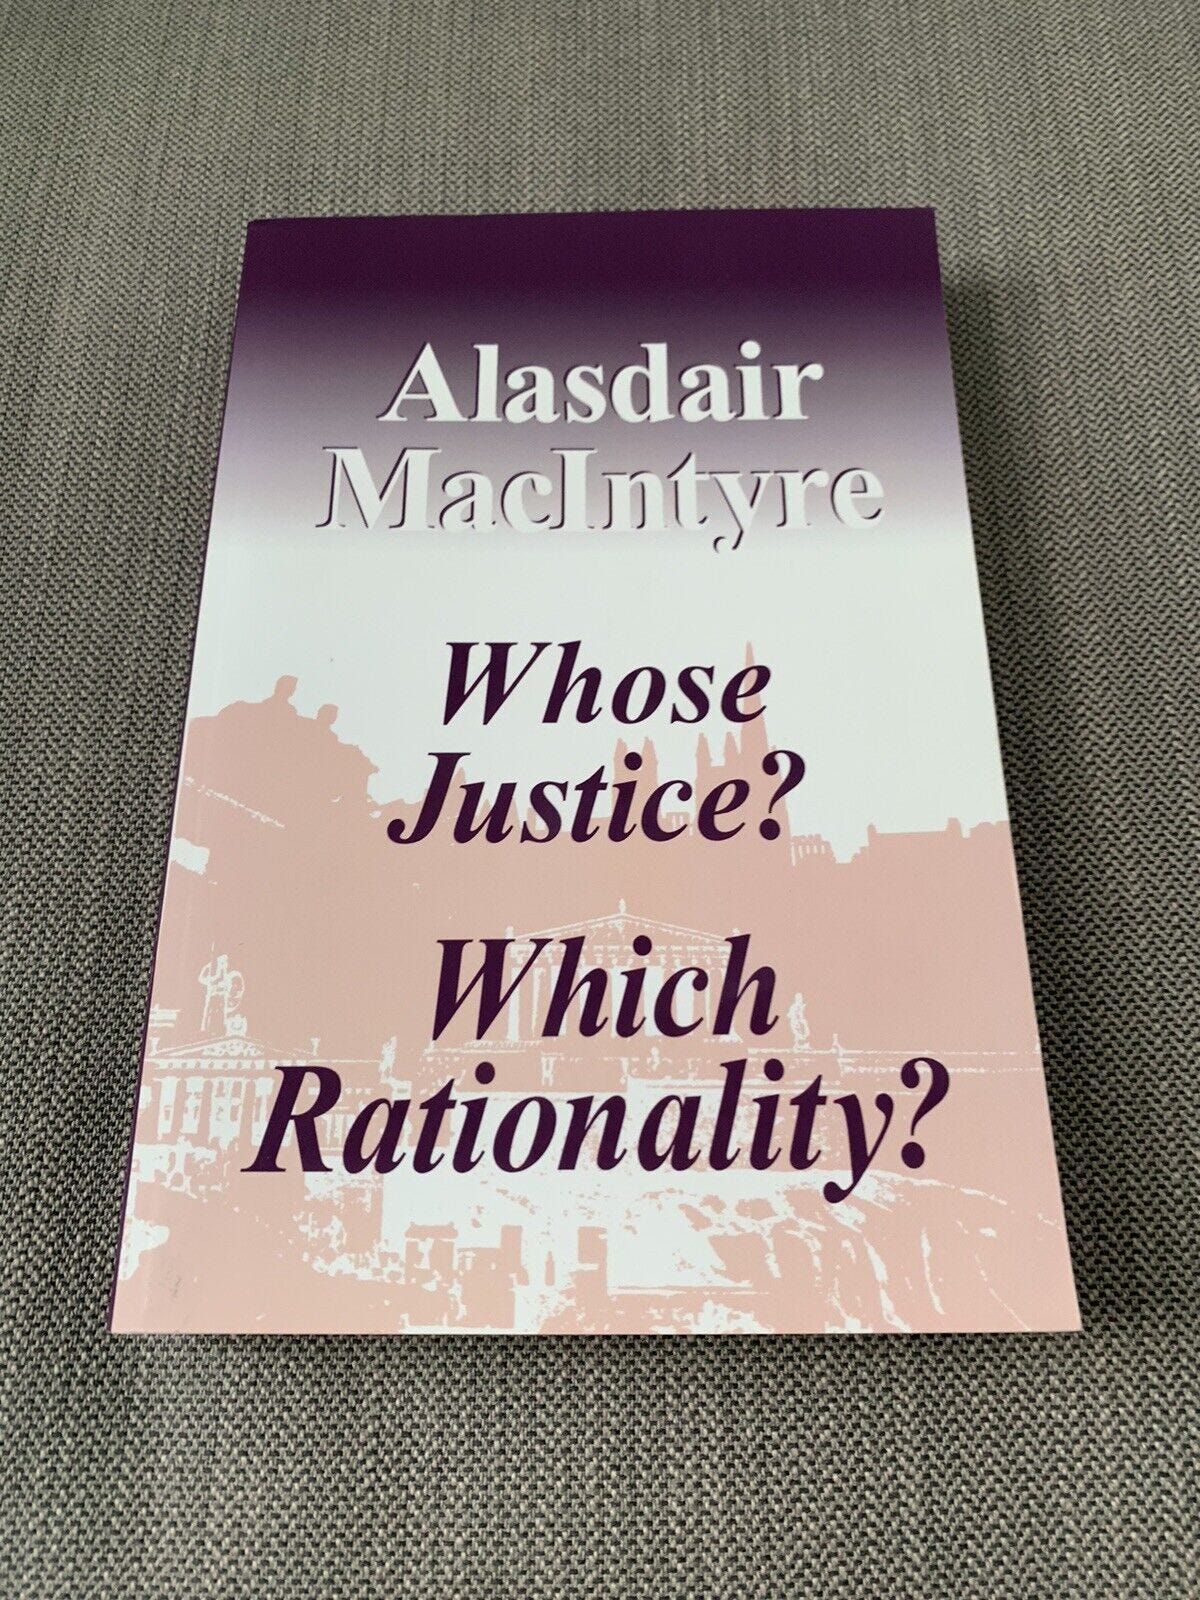 Whose Justice? Which Rationality? by Alasdair MacIntyre (1988, Trade  Paperback, 9780268019440 | eBay